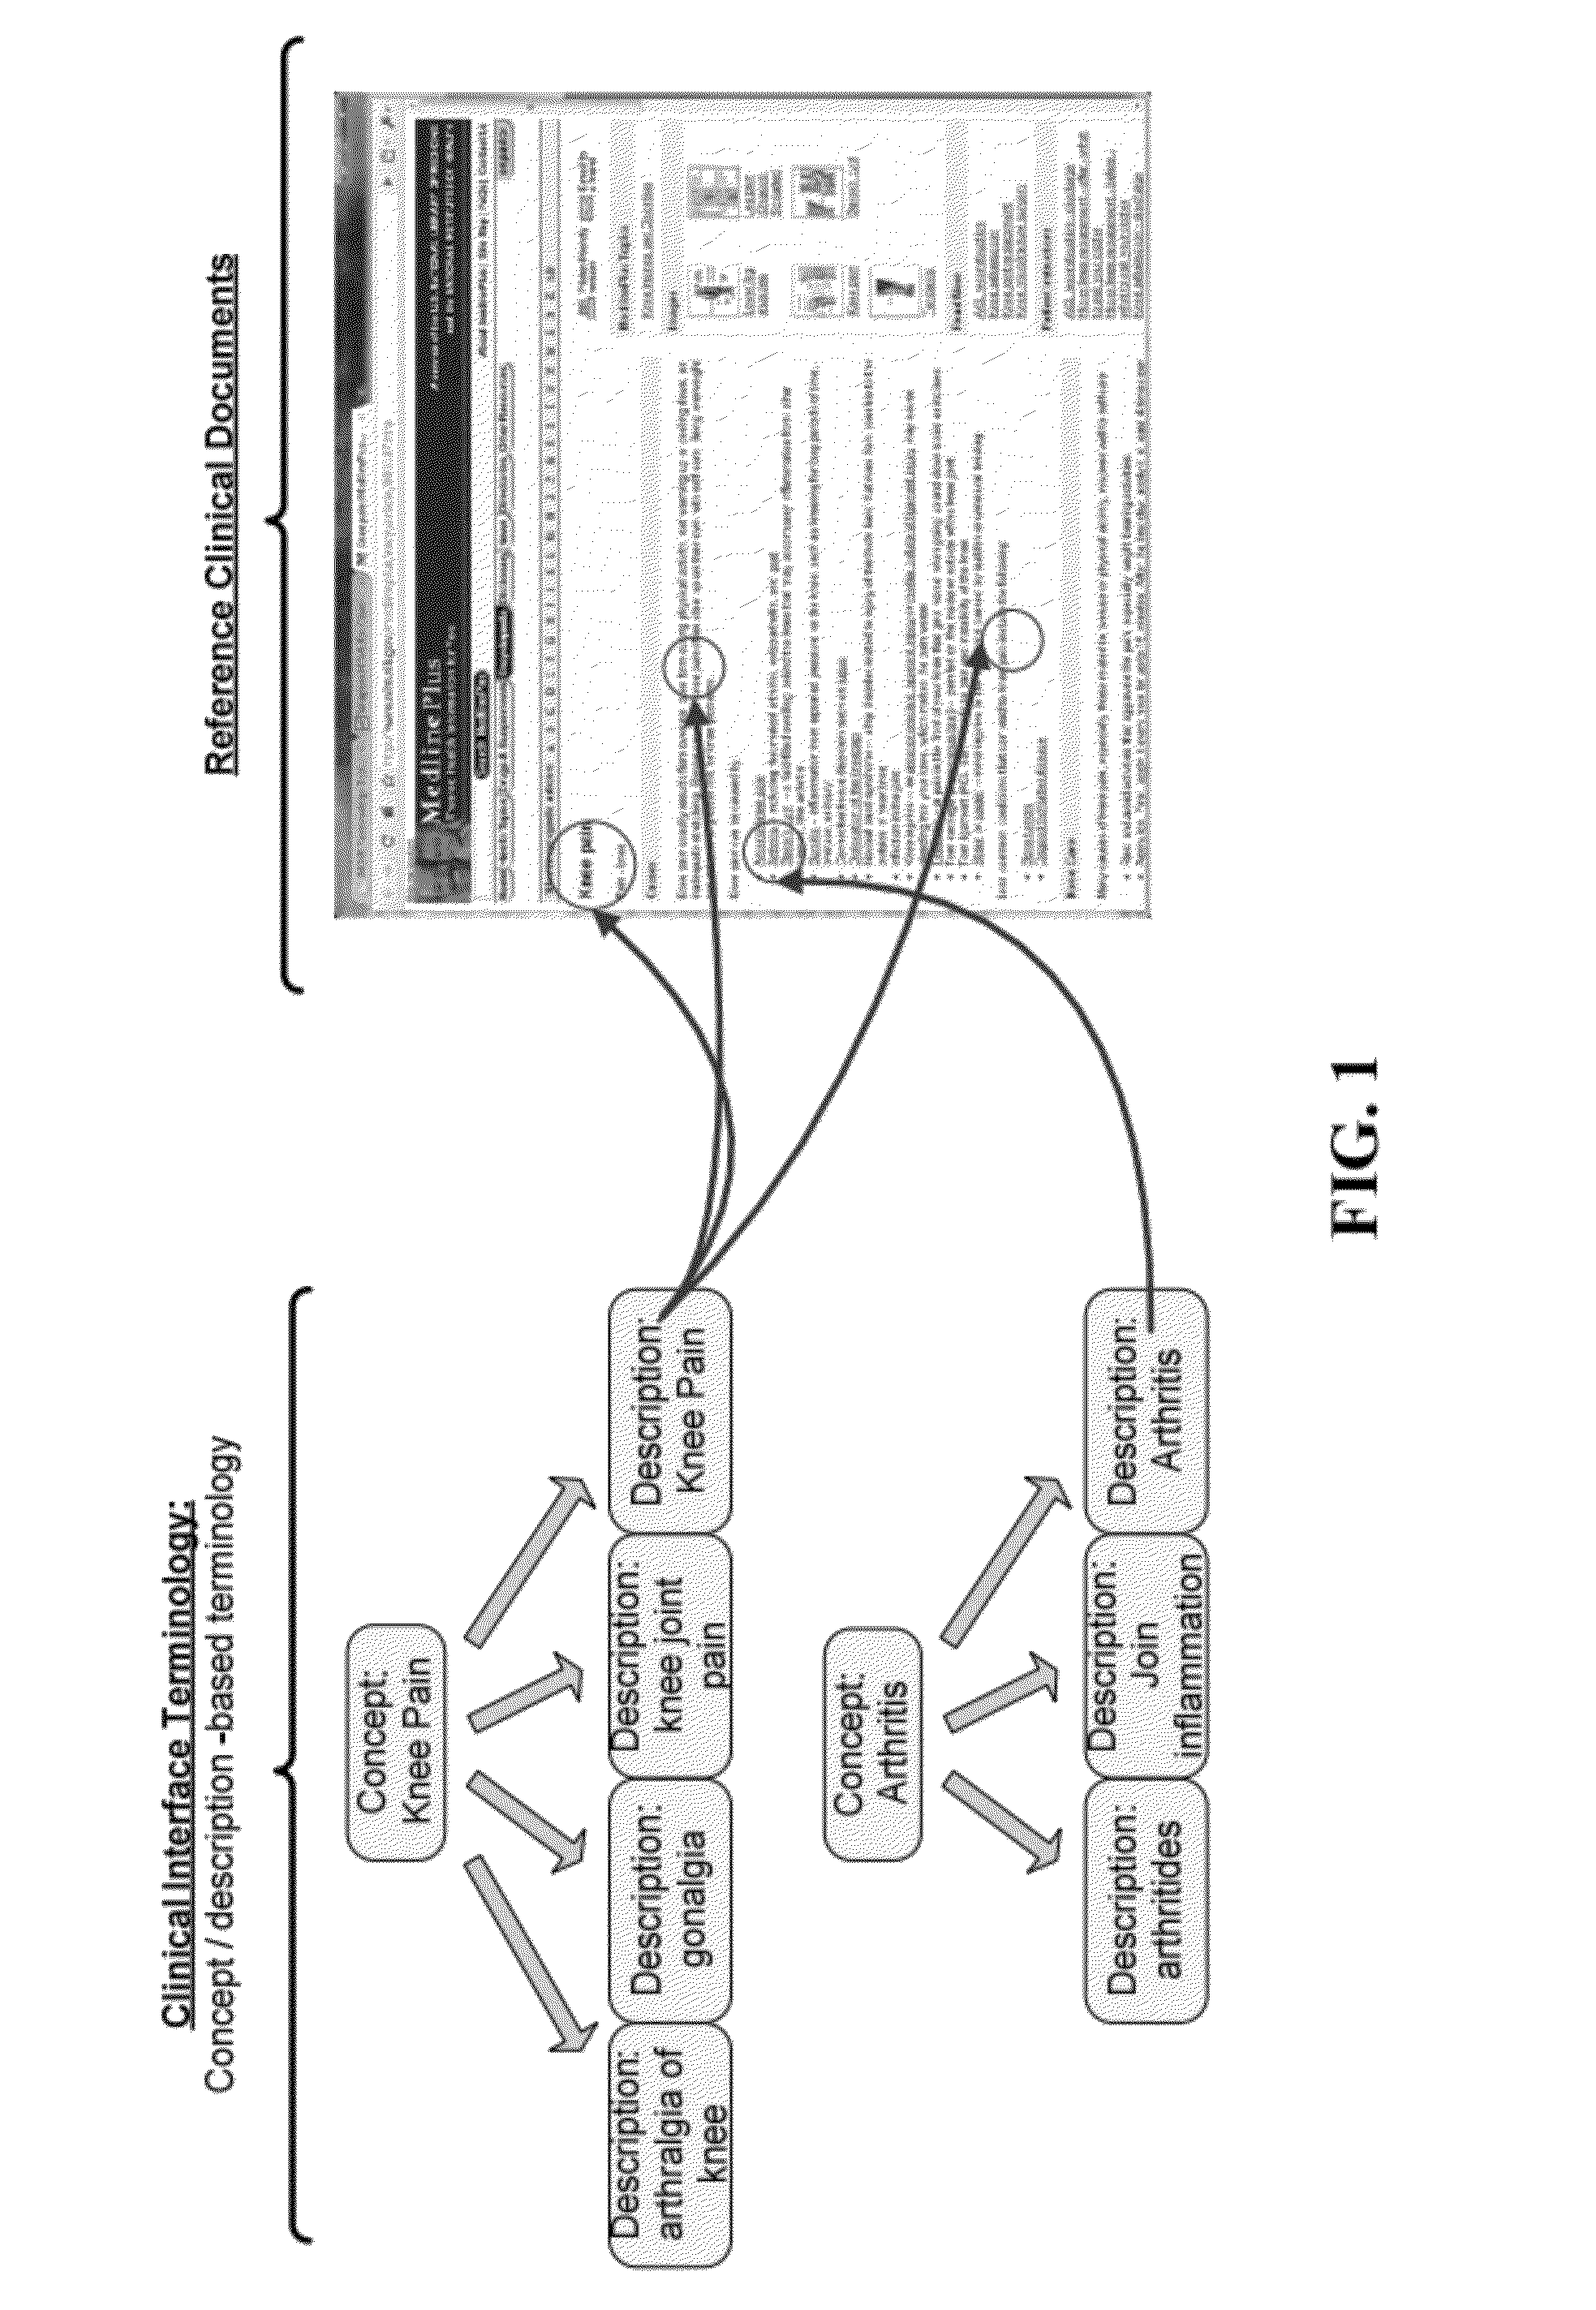 System and Process for Concept Tagging and Content Retrieval